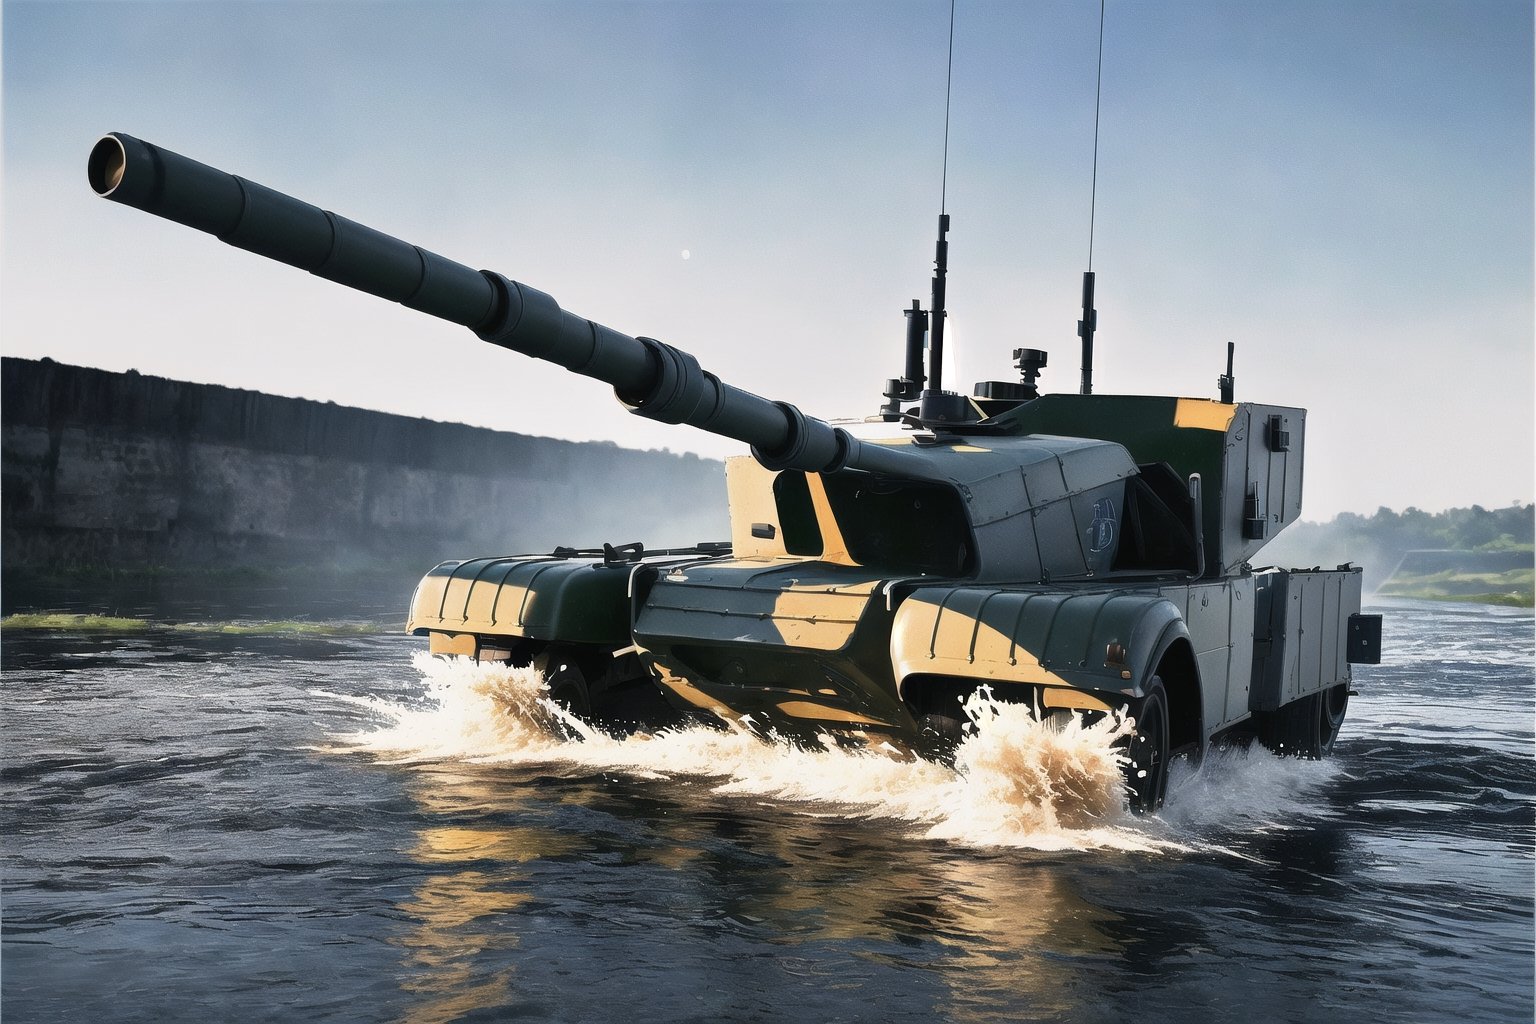 ((very good quality image)) ((highly defined details)) ((ultra realistic image)) ((hd)) ((incredible colors)) 1 tank, model T90, crossing a river, being hit in the side by a projectile, splashing water